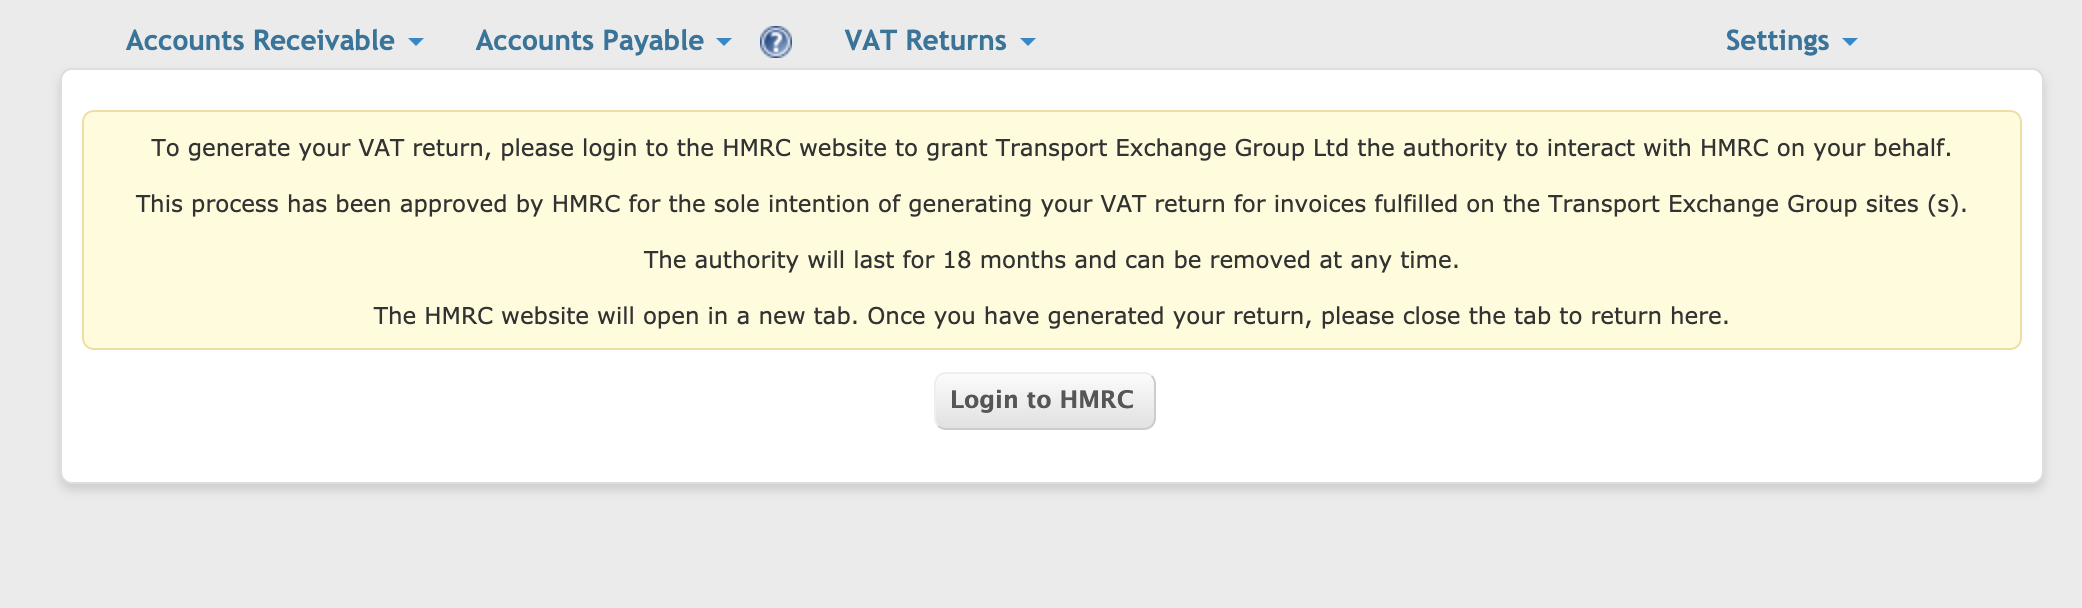 3_link_to_hmrc.png